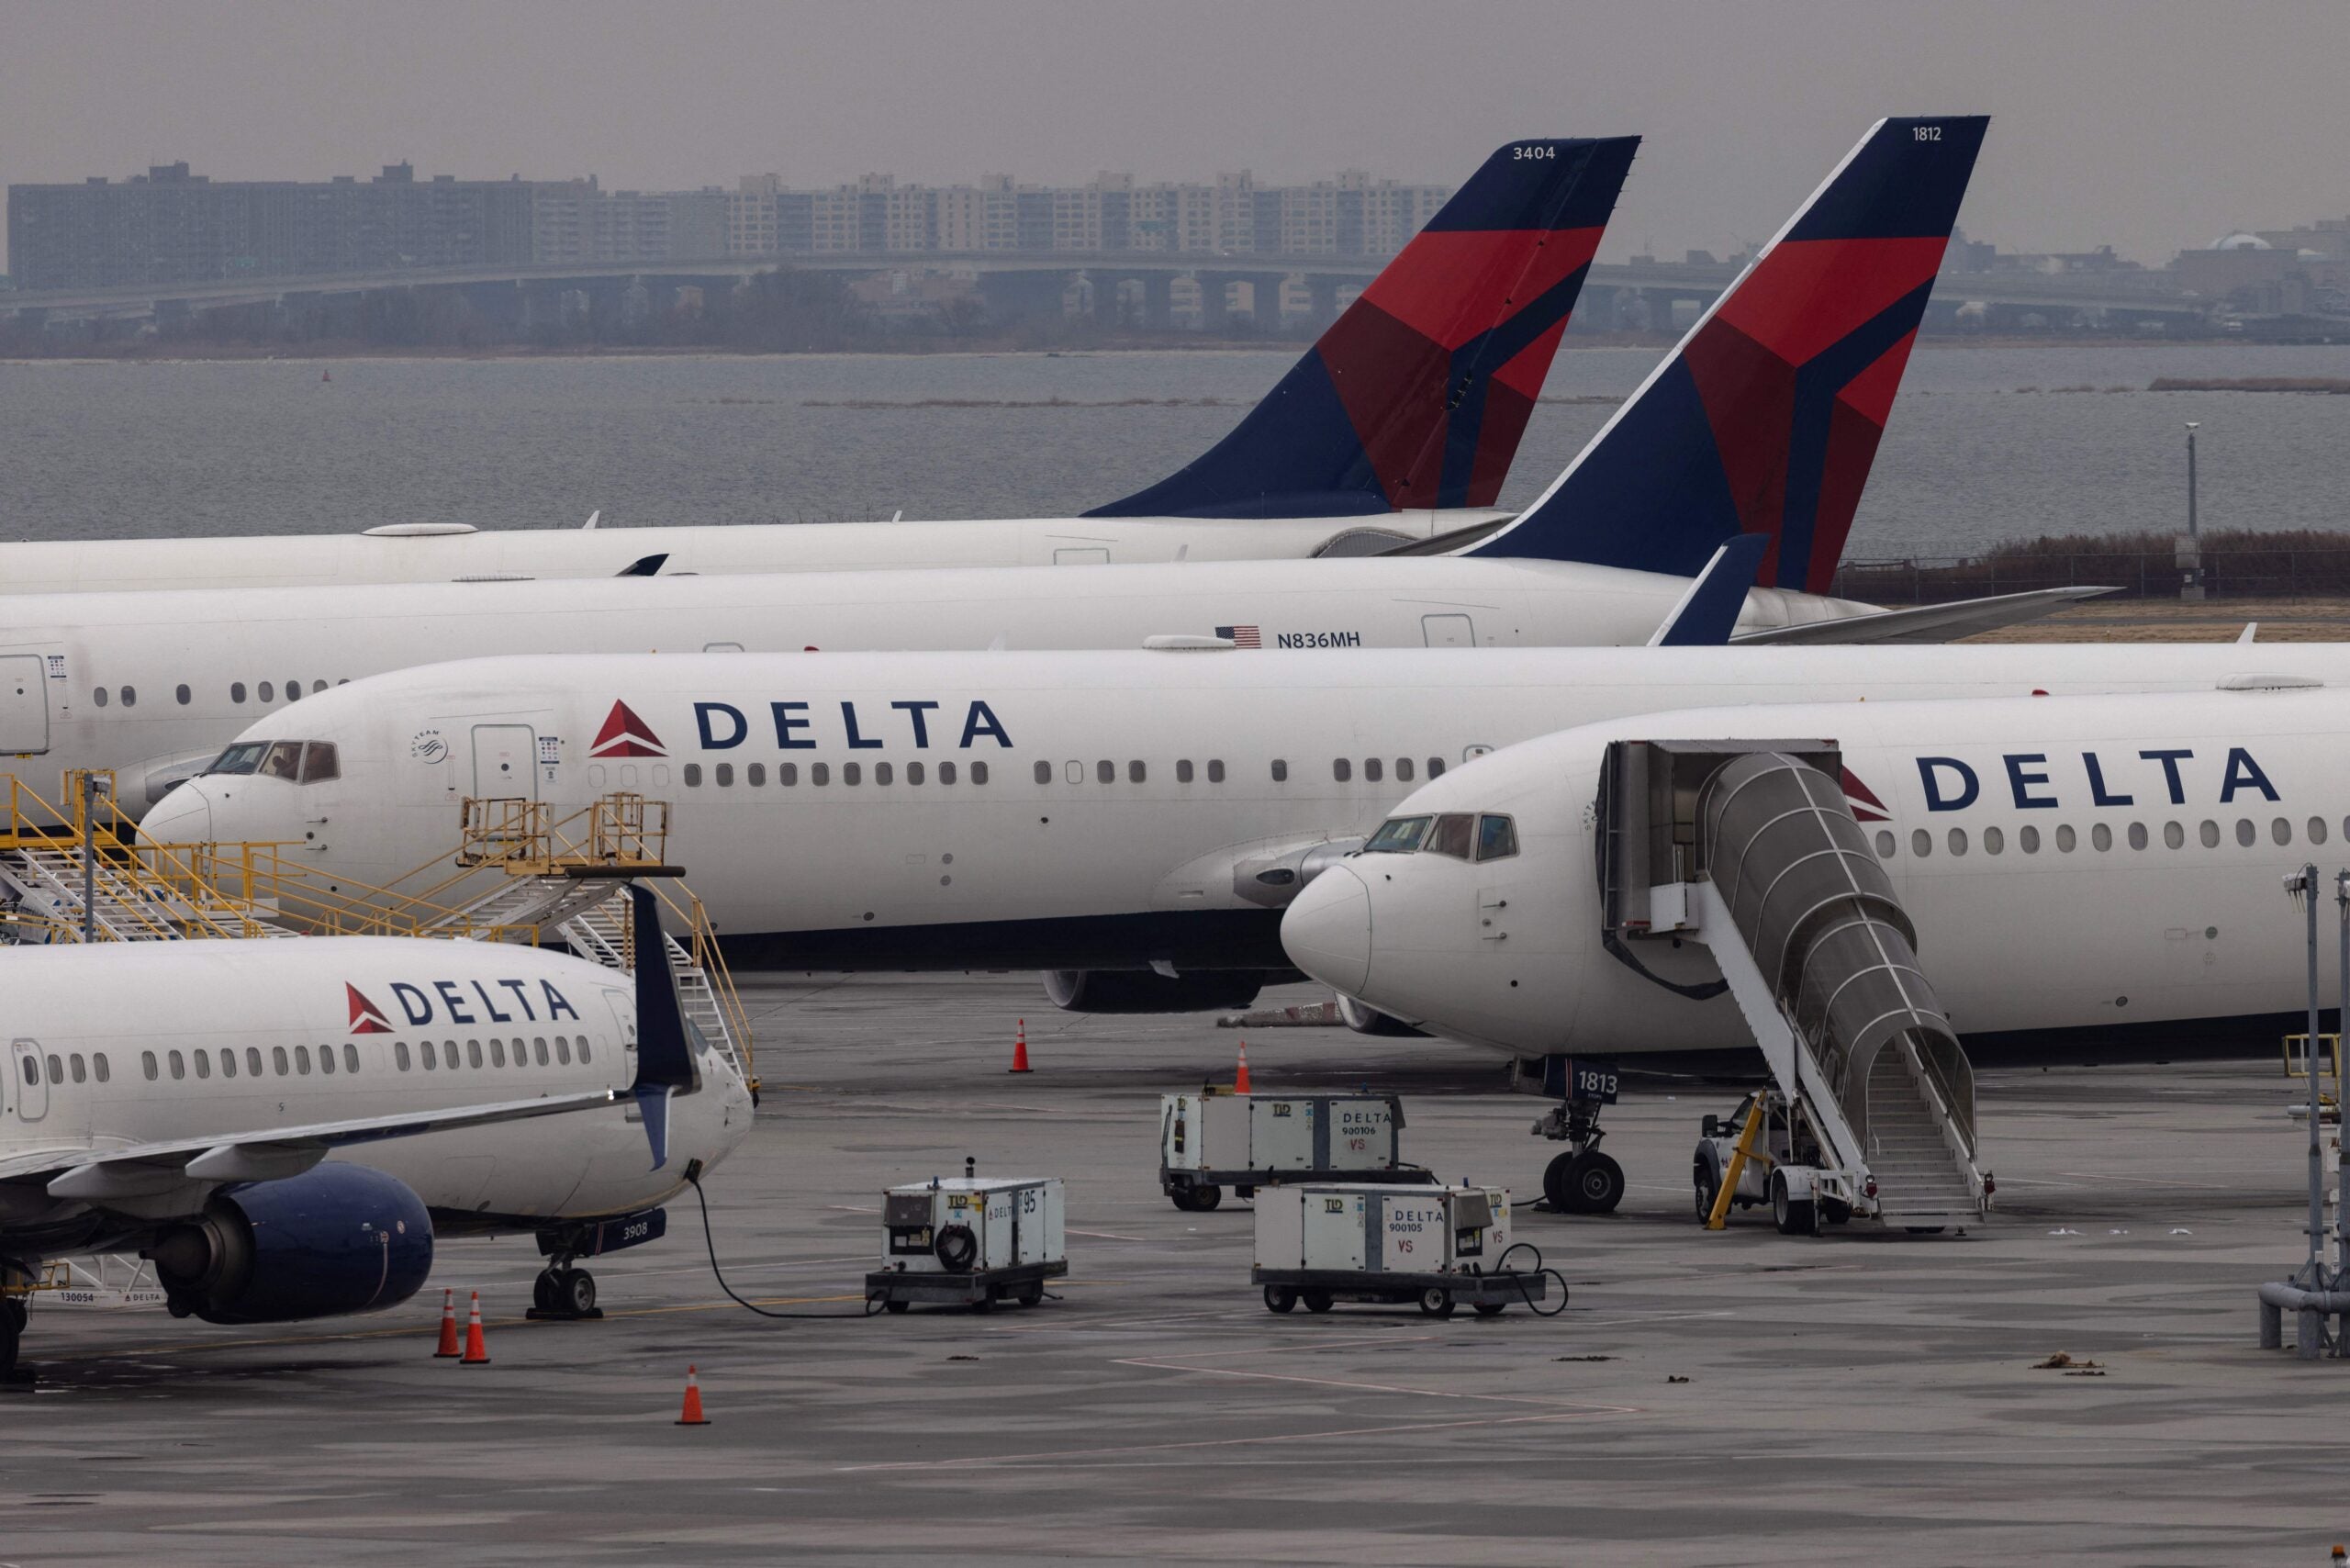 Free In-Flight Wifi Coming to Most Delta Flights Next Month